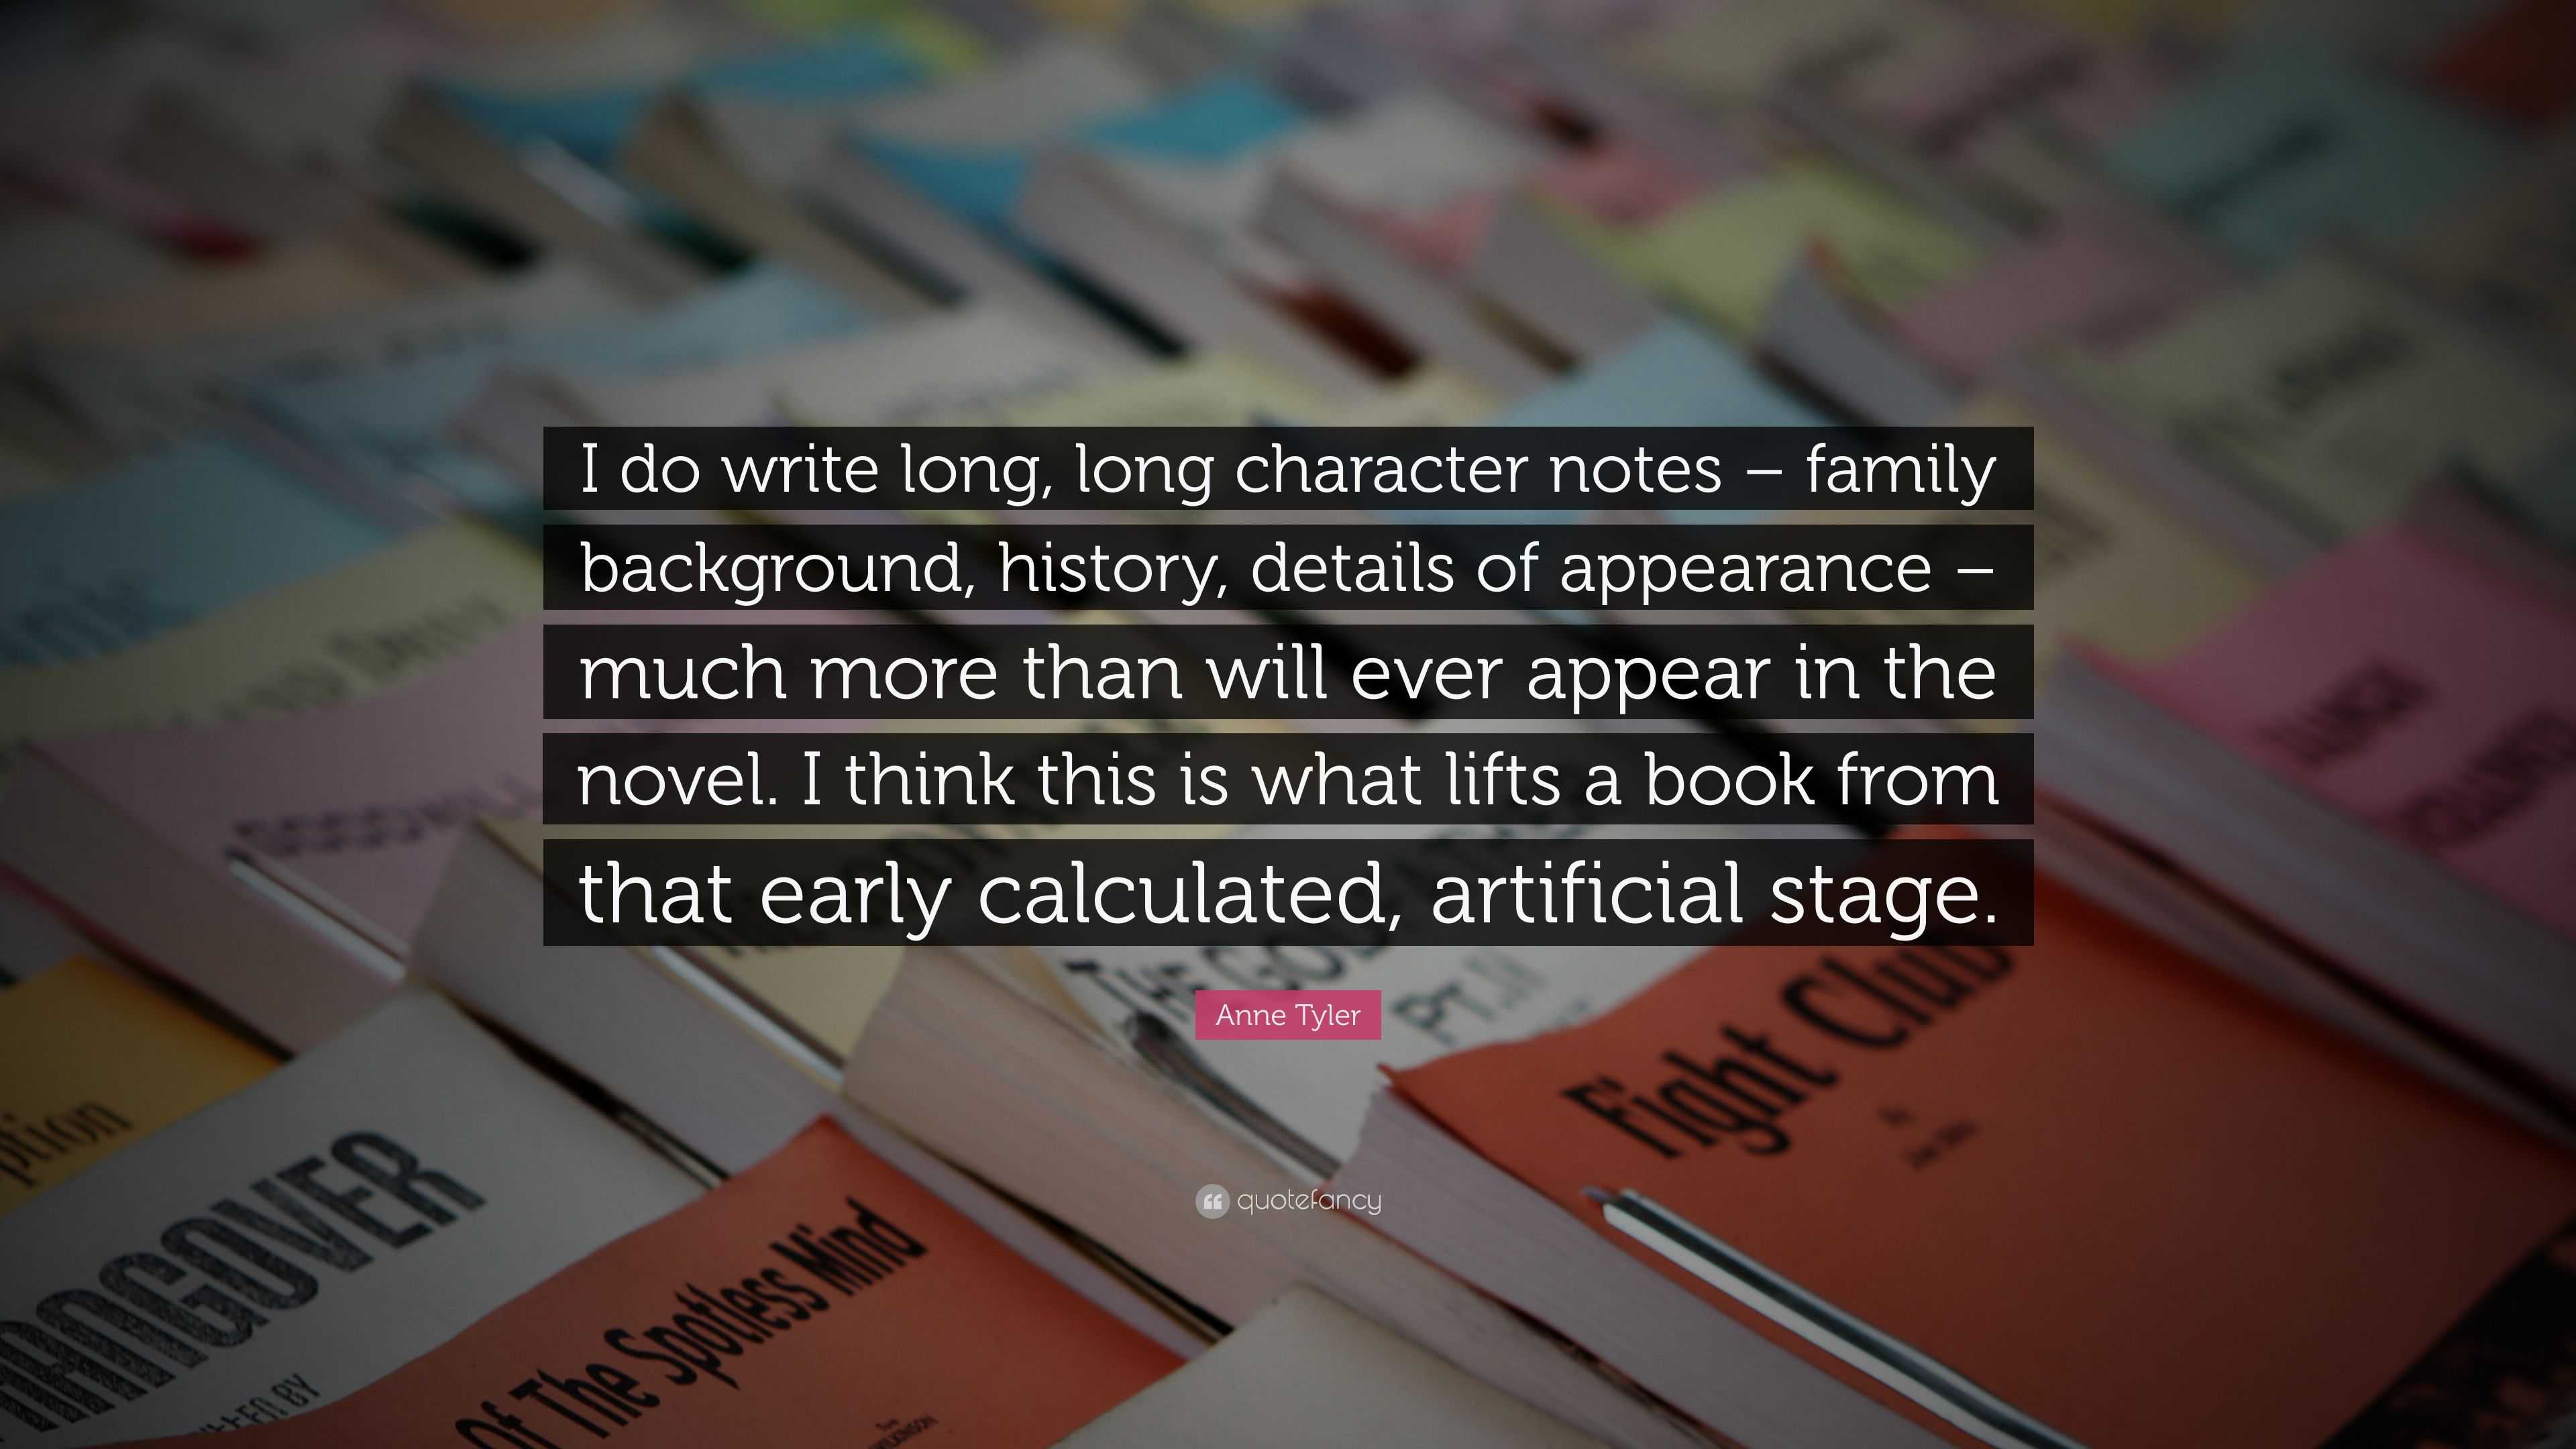 Anne Tyler Quote: “I do write long, long character notes – family background,  history, details of appearance – much more than will ever app...”